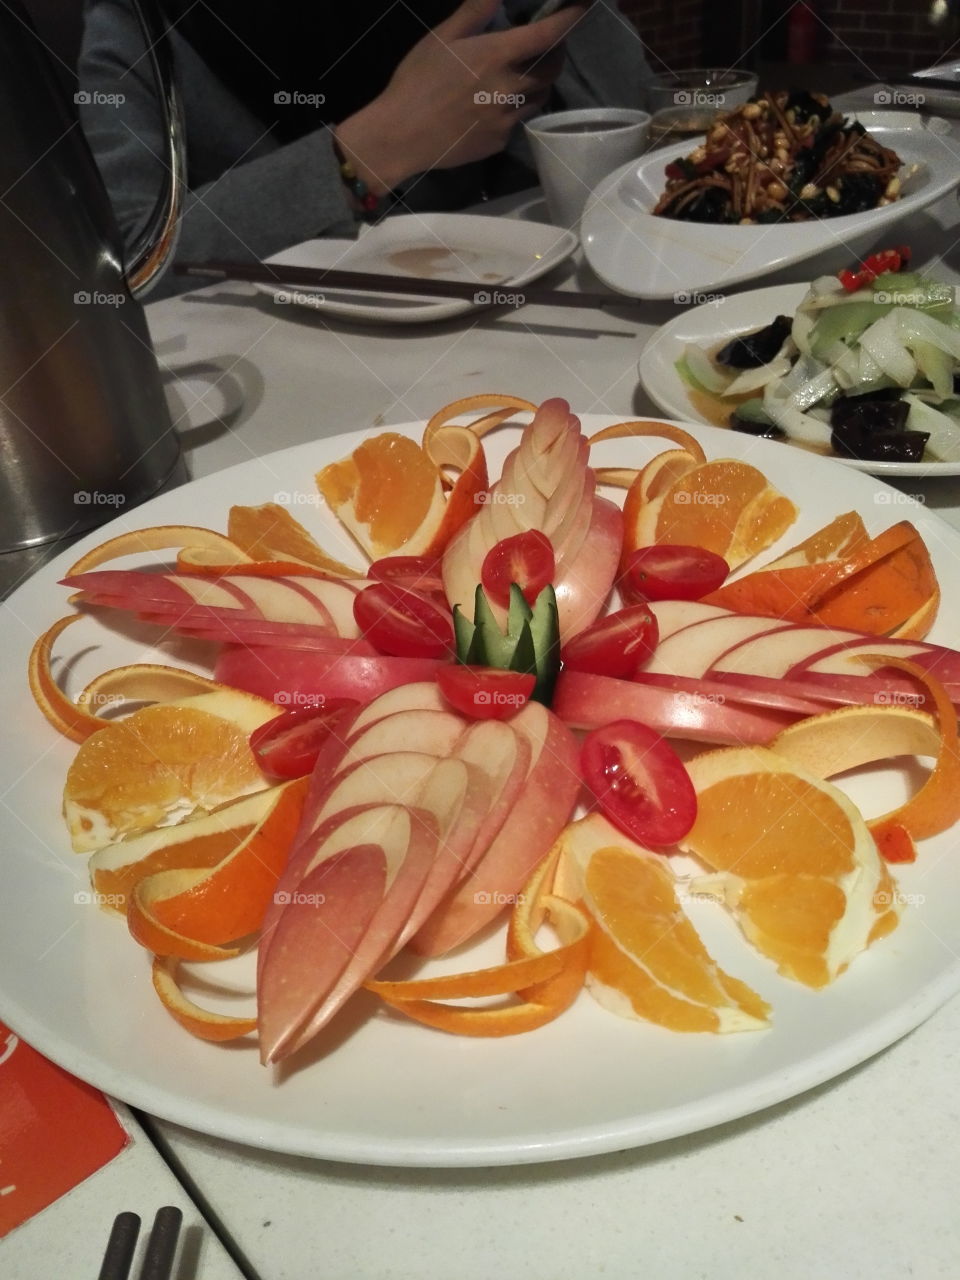 I think people know what it is . but it looks like flowers with rich colors. In China, we use the various kinds of fruits to combine it as flowers that give people good appetite.